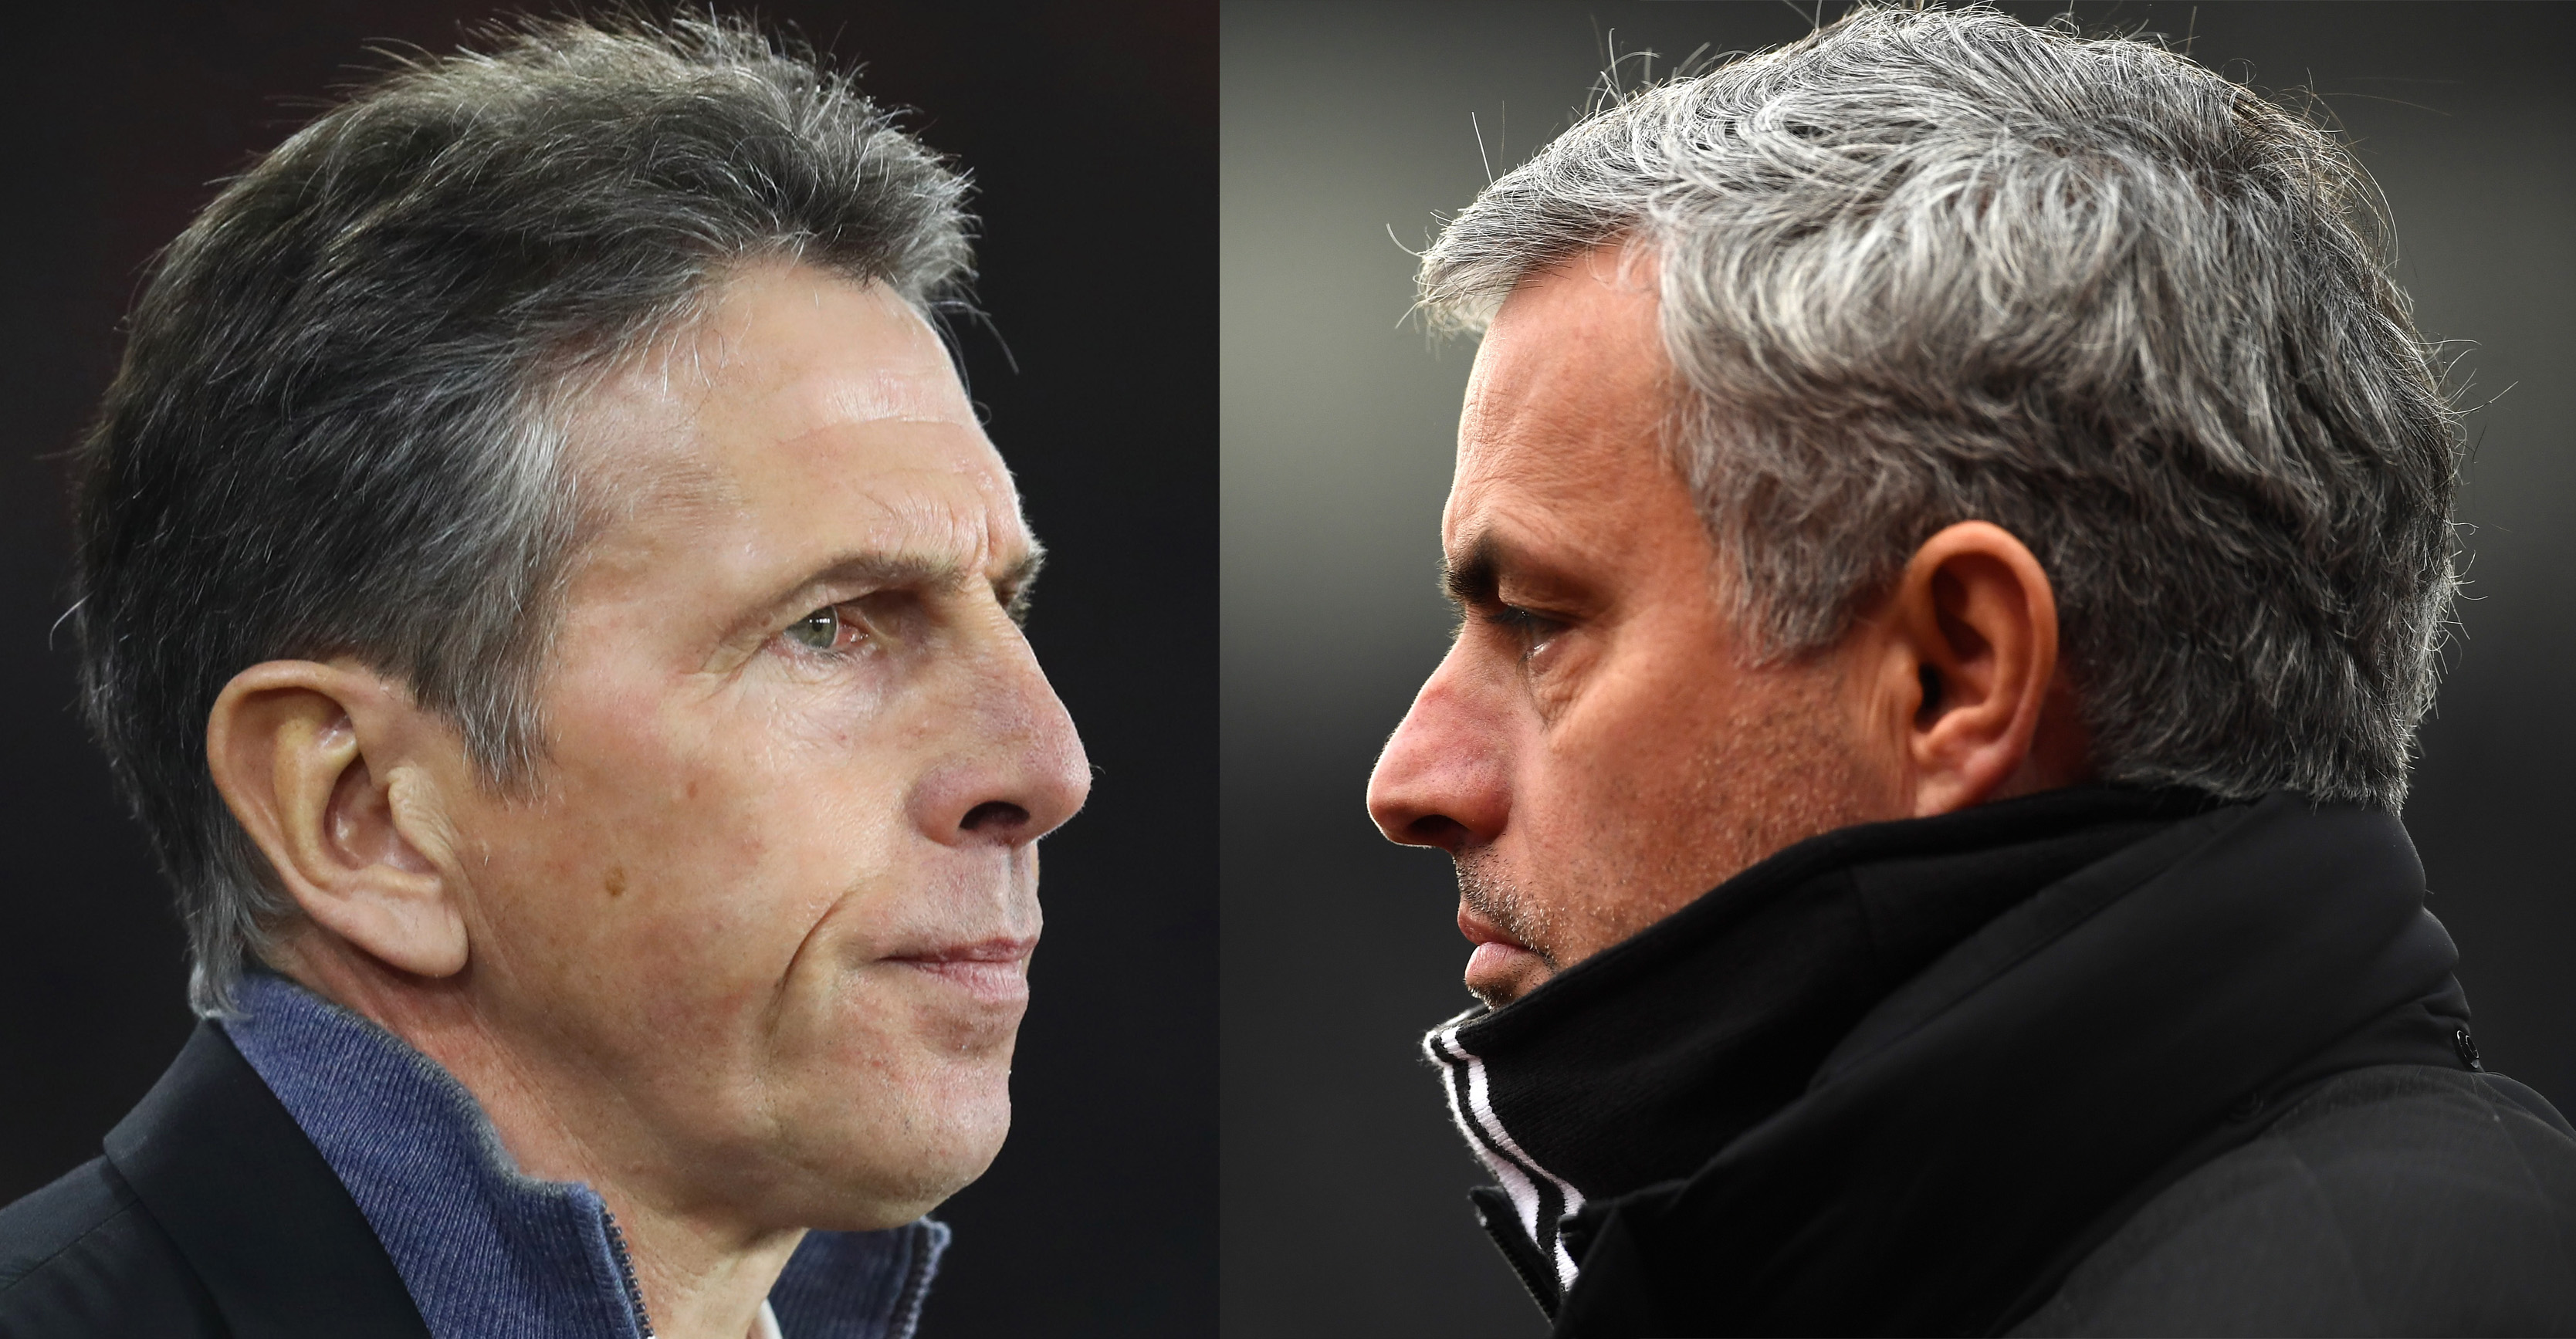 FILE PHOTO (EDITORS NOTE - COMPOSITE OF TWO IMAGES - Image numbers (L) 630621100 and 632284824) In this composite image a comparision has been made between Claude Puel manager of Southampton (L) and Jose Mourinho, Manager of Manchester United.  Southampton and Manchester United meet in the EFL Cup Final at Wembley Stadium on February 26, 2017 in London,England.  ***LEFT IMAGE*** SOUTHAMPTON, ENGLAND - DECEMBER 28: Claude Puel manager of Southampton looks on prior to the Premier League match between Southampton and Tottenham Hotspur at St Mary's Stadium on December 28, 2016 in Southampton, England. (Photo by Julian Finney/Getty Images)***RIGHT IMAGE*** STOKE ON TRENT, ENGLAND - JANUARY 21: Jose Mourinho, Manager of Manchester United looks on during the Premier League match between Stoke City and Manchester United at Bet365 Stadium on January 21, 2017 in Stoke on Trent, England. (Photo by Laurence Griffiths/Getty Images)